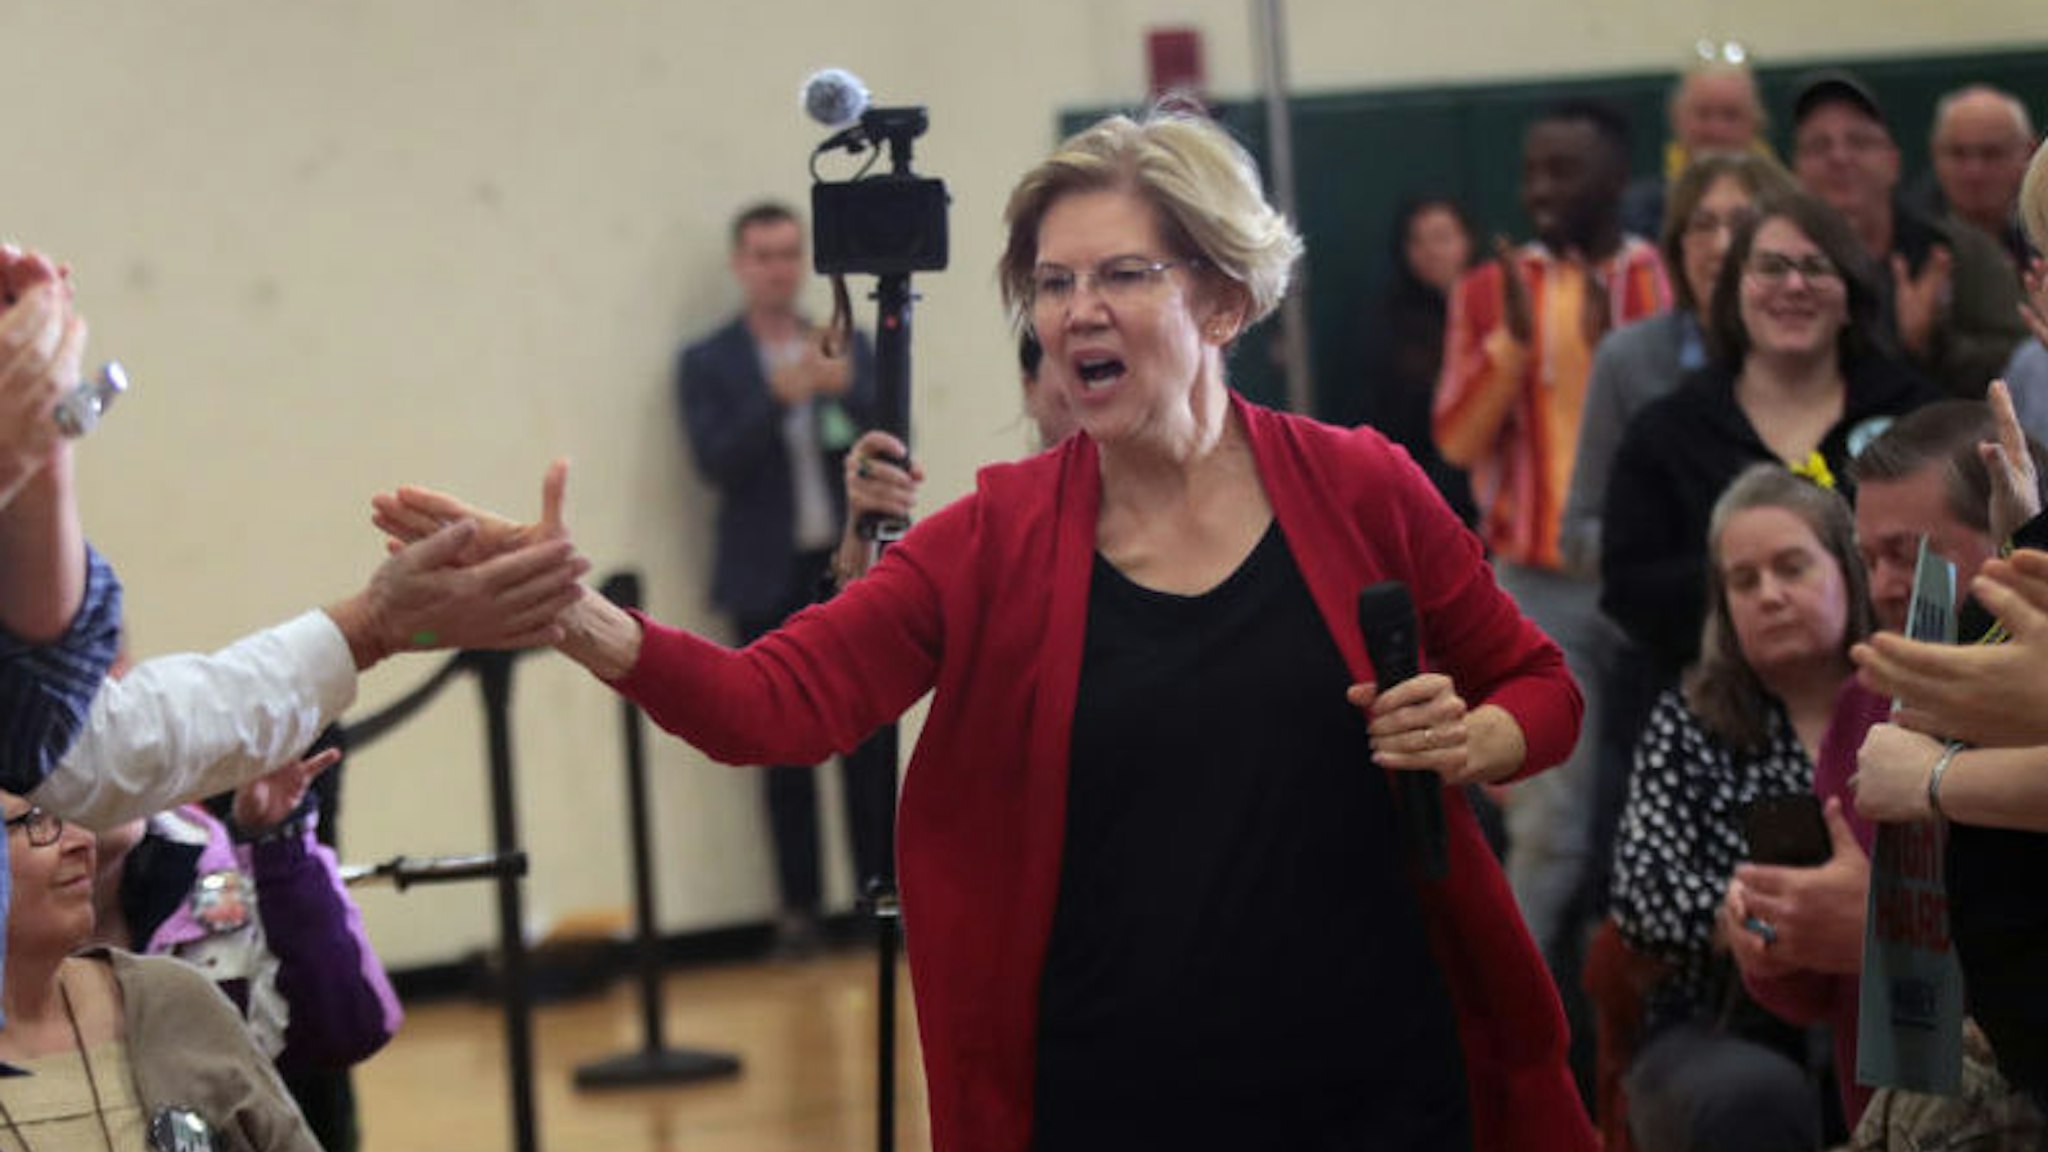 Democratic presidential candidate Sen. Elizabeth Warren (D-MA) arrives for a campaign stop at Hempstead High School on November 02, 2019 in Dubuque, Iowa. The 2020 Iowa Democratic caucuses will take place on February 3, 2020, making it the first nominating contest for the Democratic Party in choosing their presidential candidate. (Photo by Scott Olson/Getty Images)